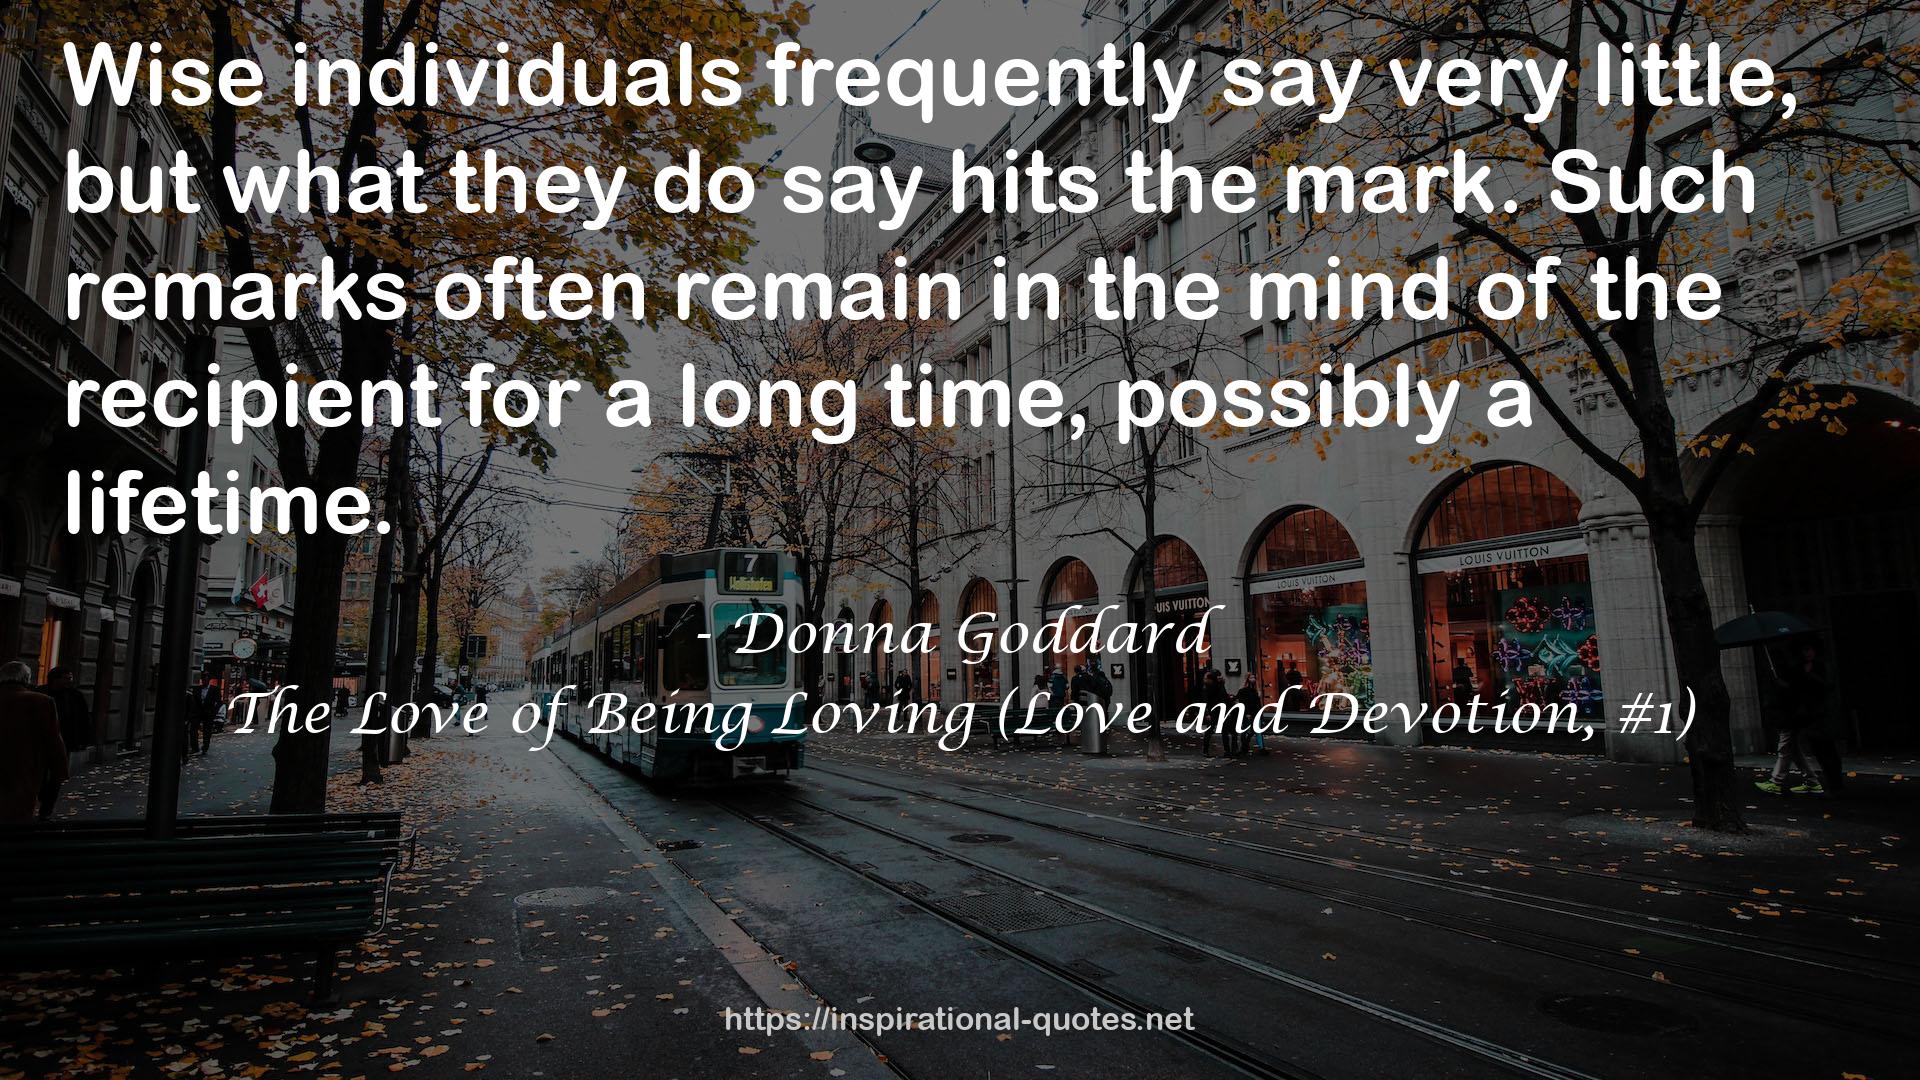 The Love of Being Loving (Love and Devotion, #1) QUOTES